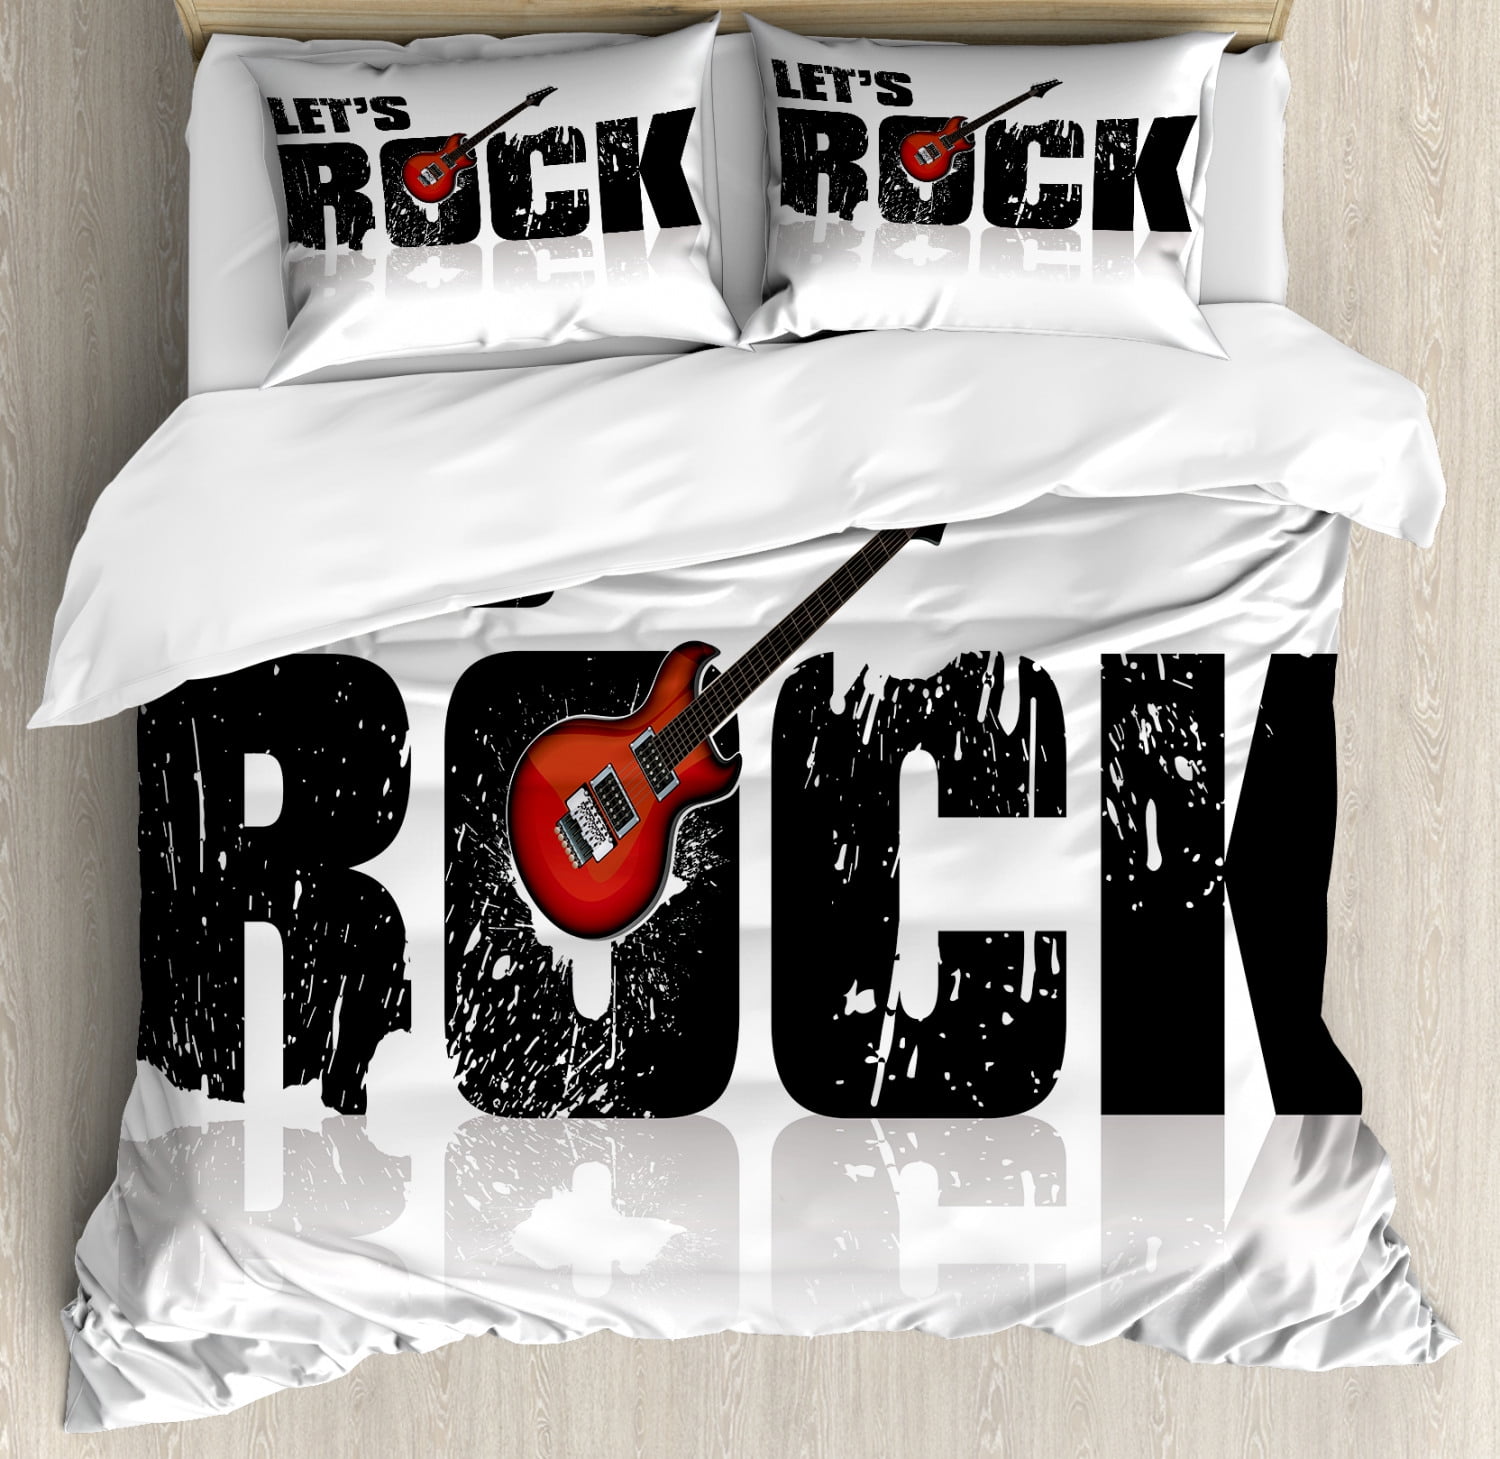 Rock Music Duvet Cover Set Twin Queen King Sizes with Pillow Shams Bedding Decor 